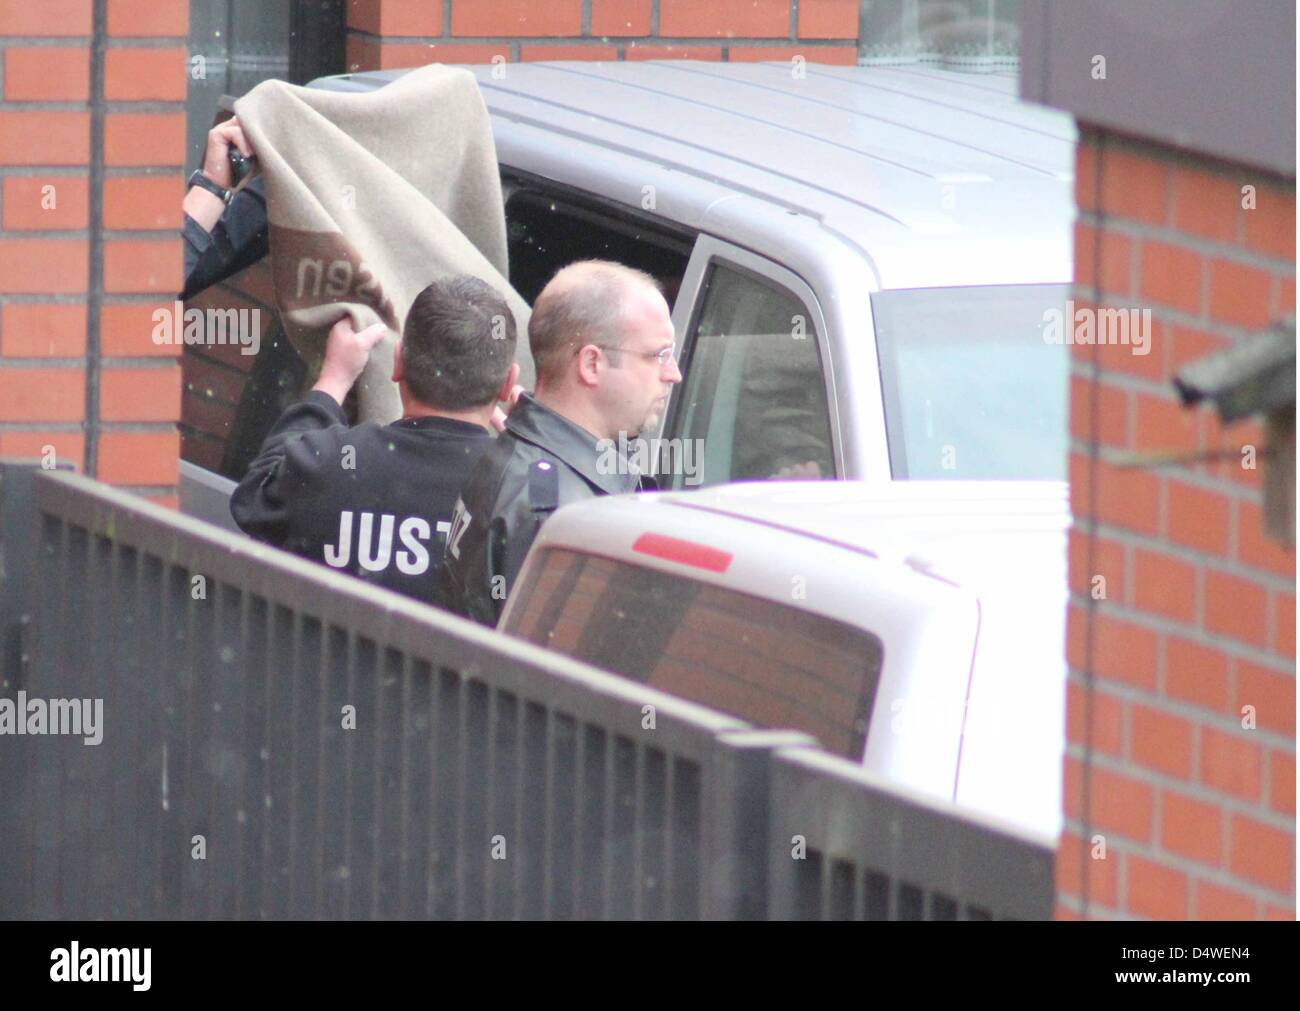 The suspect of the Bodenfelde murder case gets out of a police car and is covered with a blanket in Northeim, Germany, 26 November 2010. Jaqn O. has confessed to have committed the murder on two adolescents in Bodenfeld. The suspect confessed in front of the investigative court, according to information released by the Public Prosecution Service Goettingen. The unemployed man confe Stock Photo